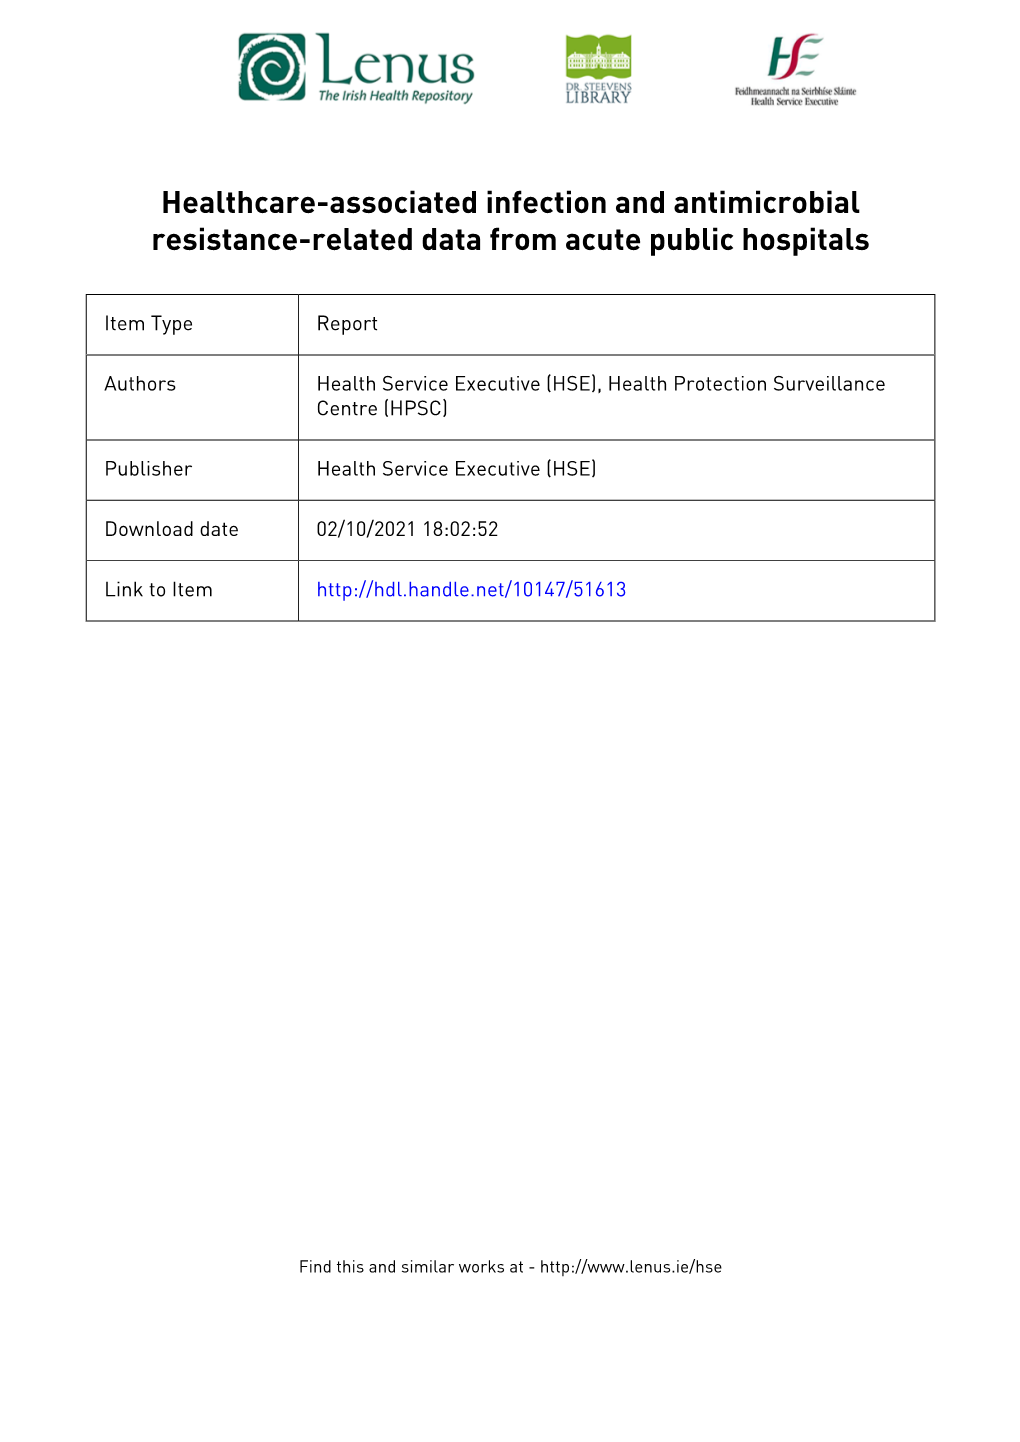 Healthcare-Associated Infection and Antimicrobial Resistance-Related Data from Acute Public Hospitals